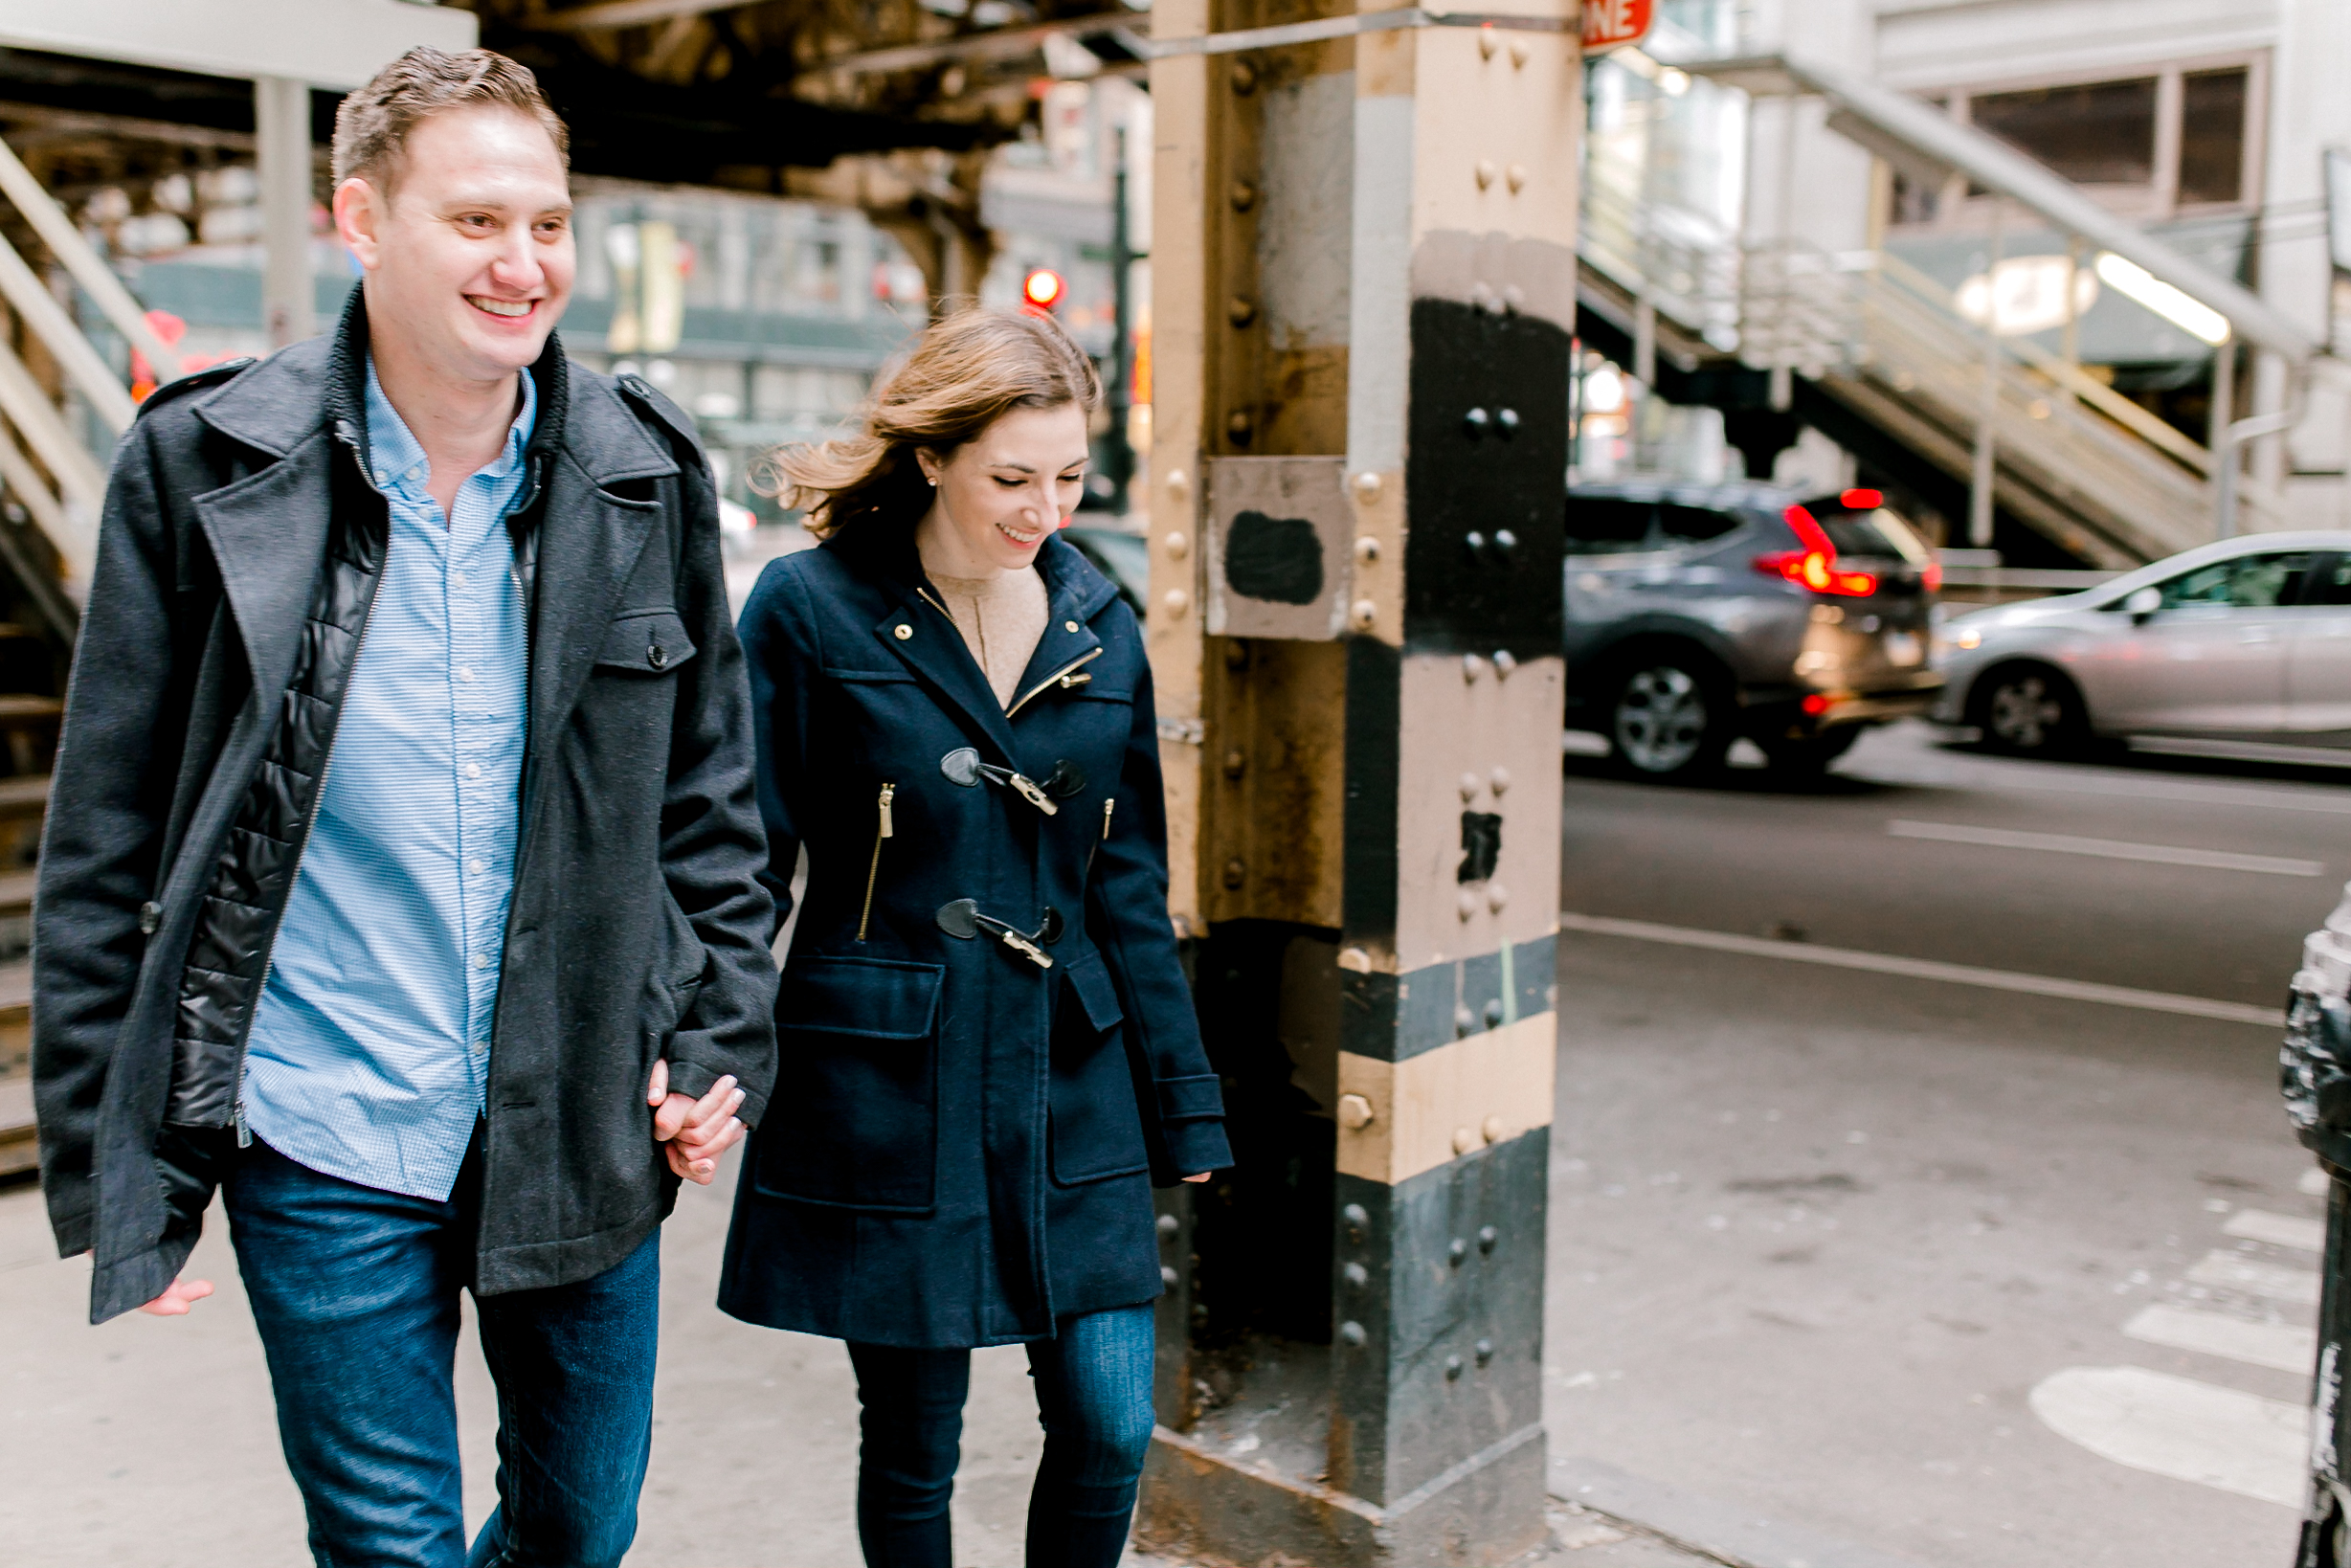 walking among the streets ob Chicago engagement session